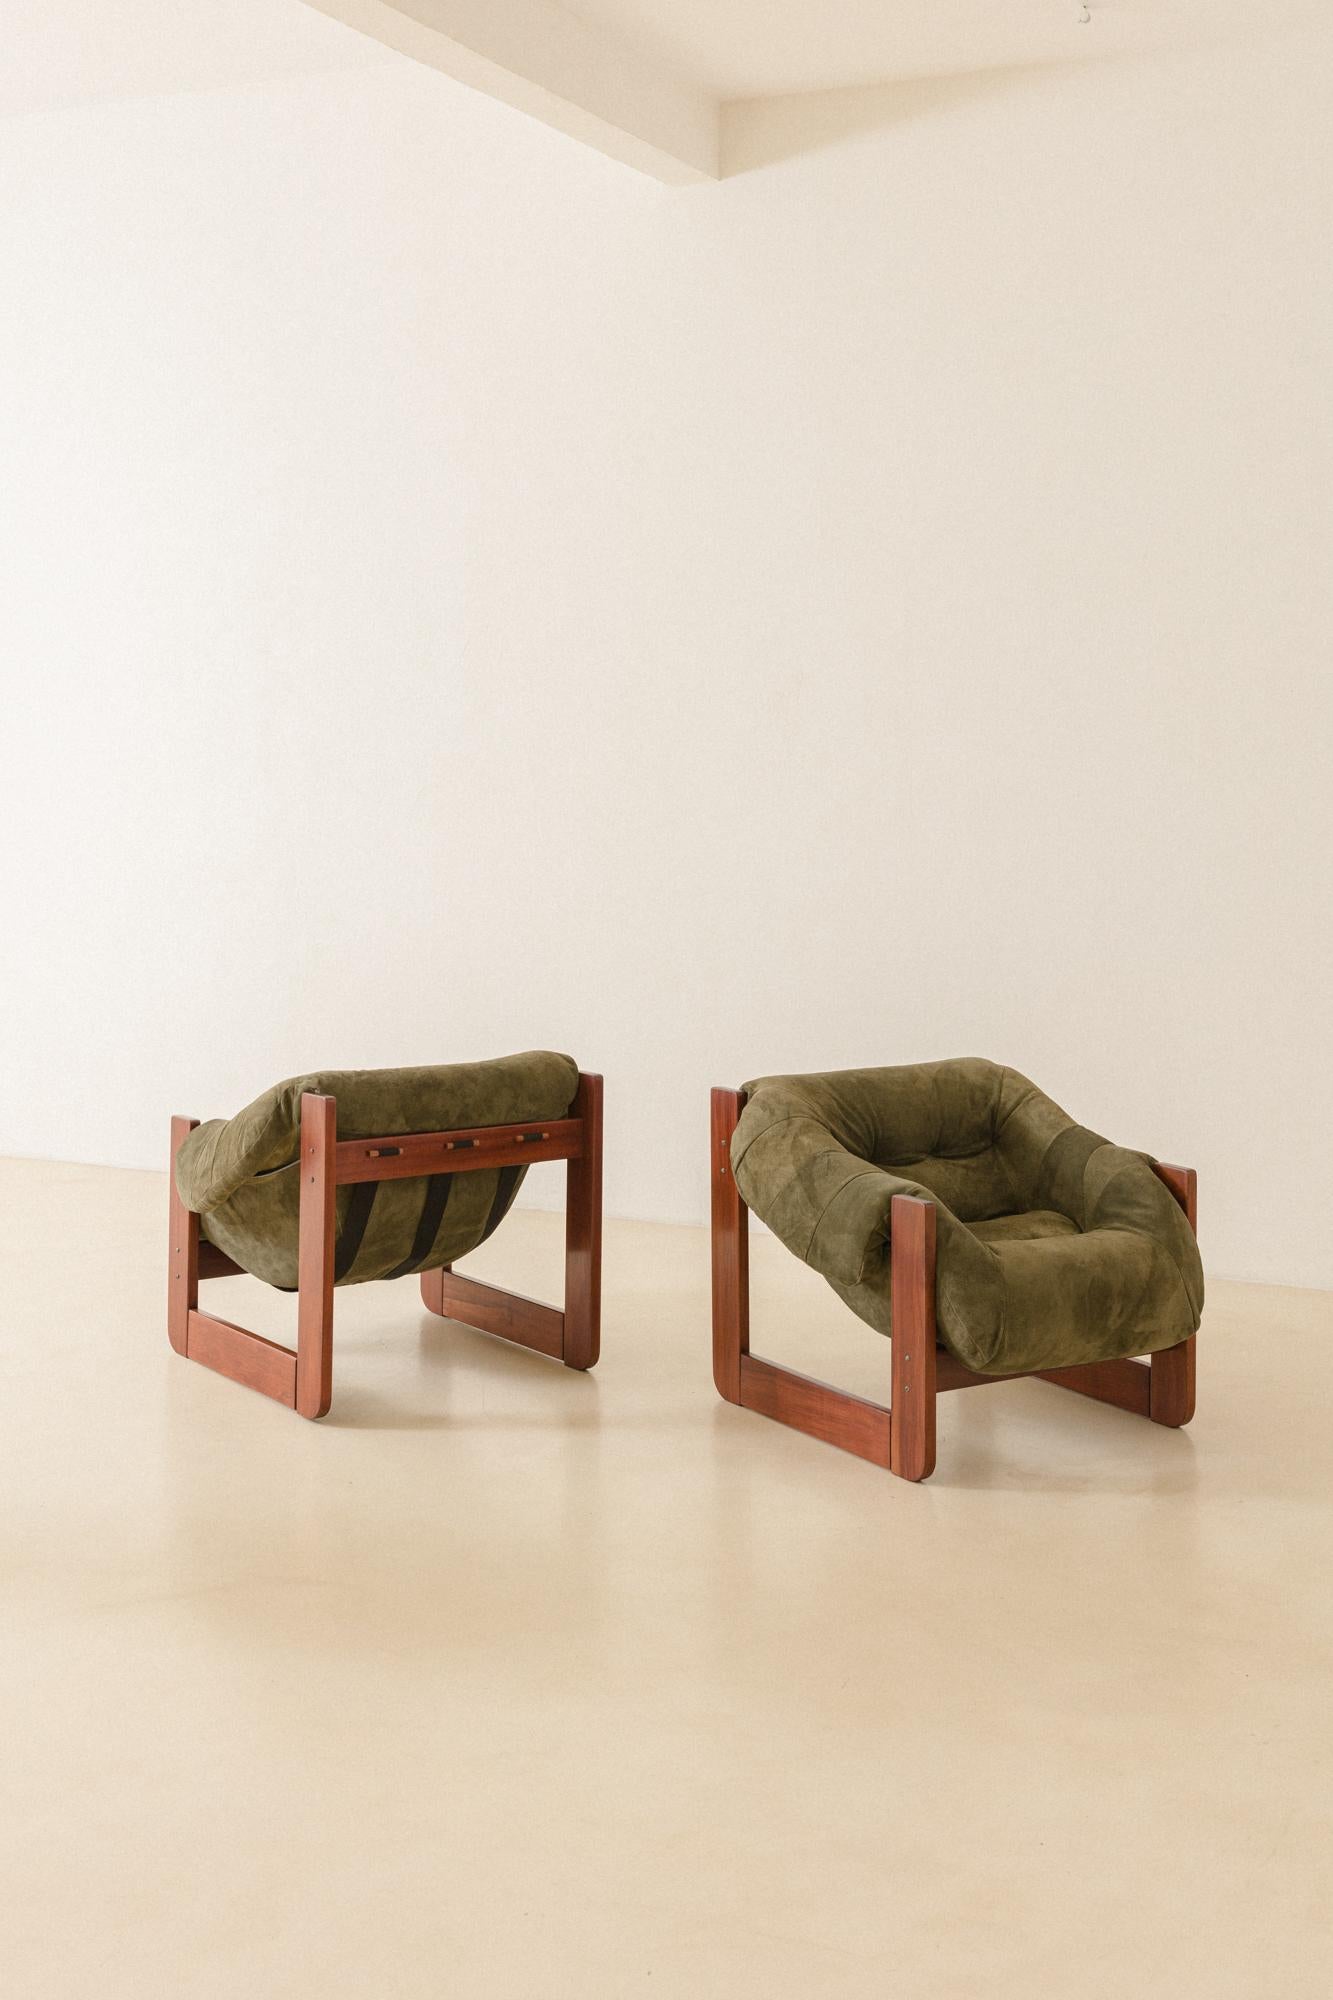 Brazilian Pair of MP-97 Lounge Chairs by Percival Lafer, Midcentury, Brazil, 1970s For Sale